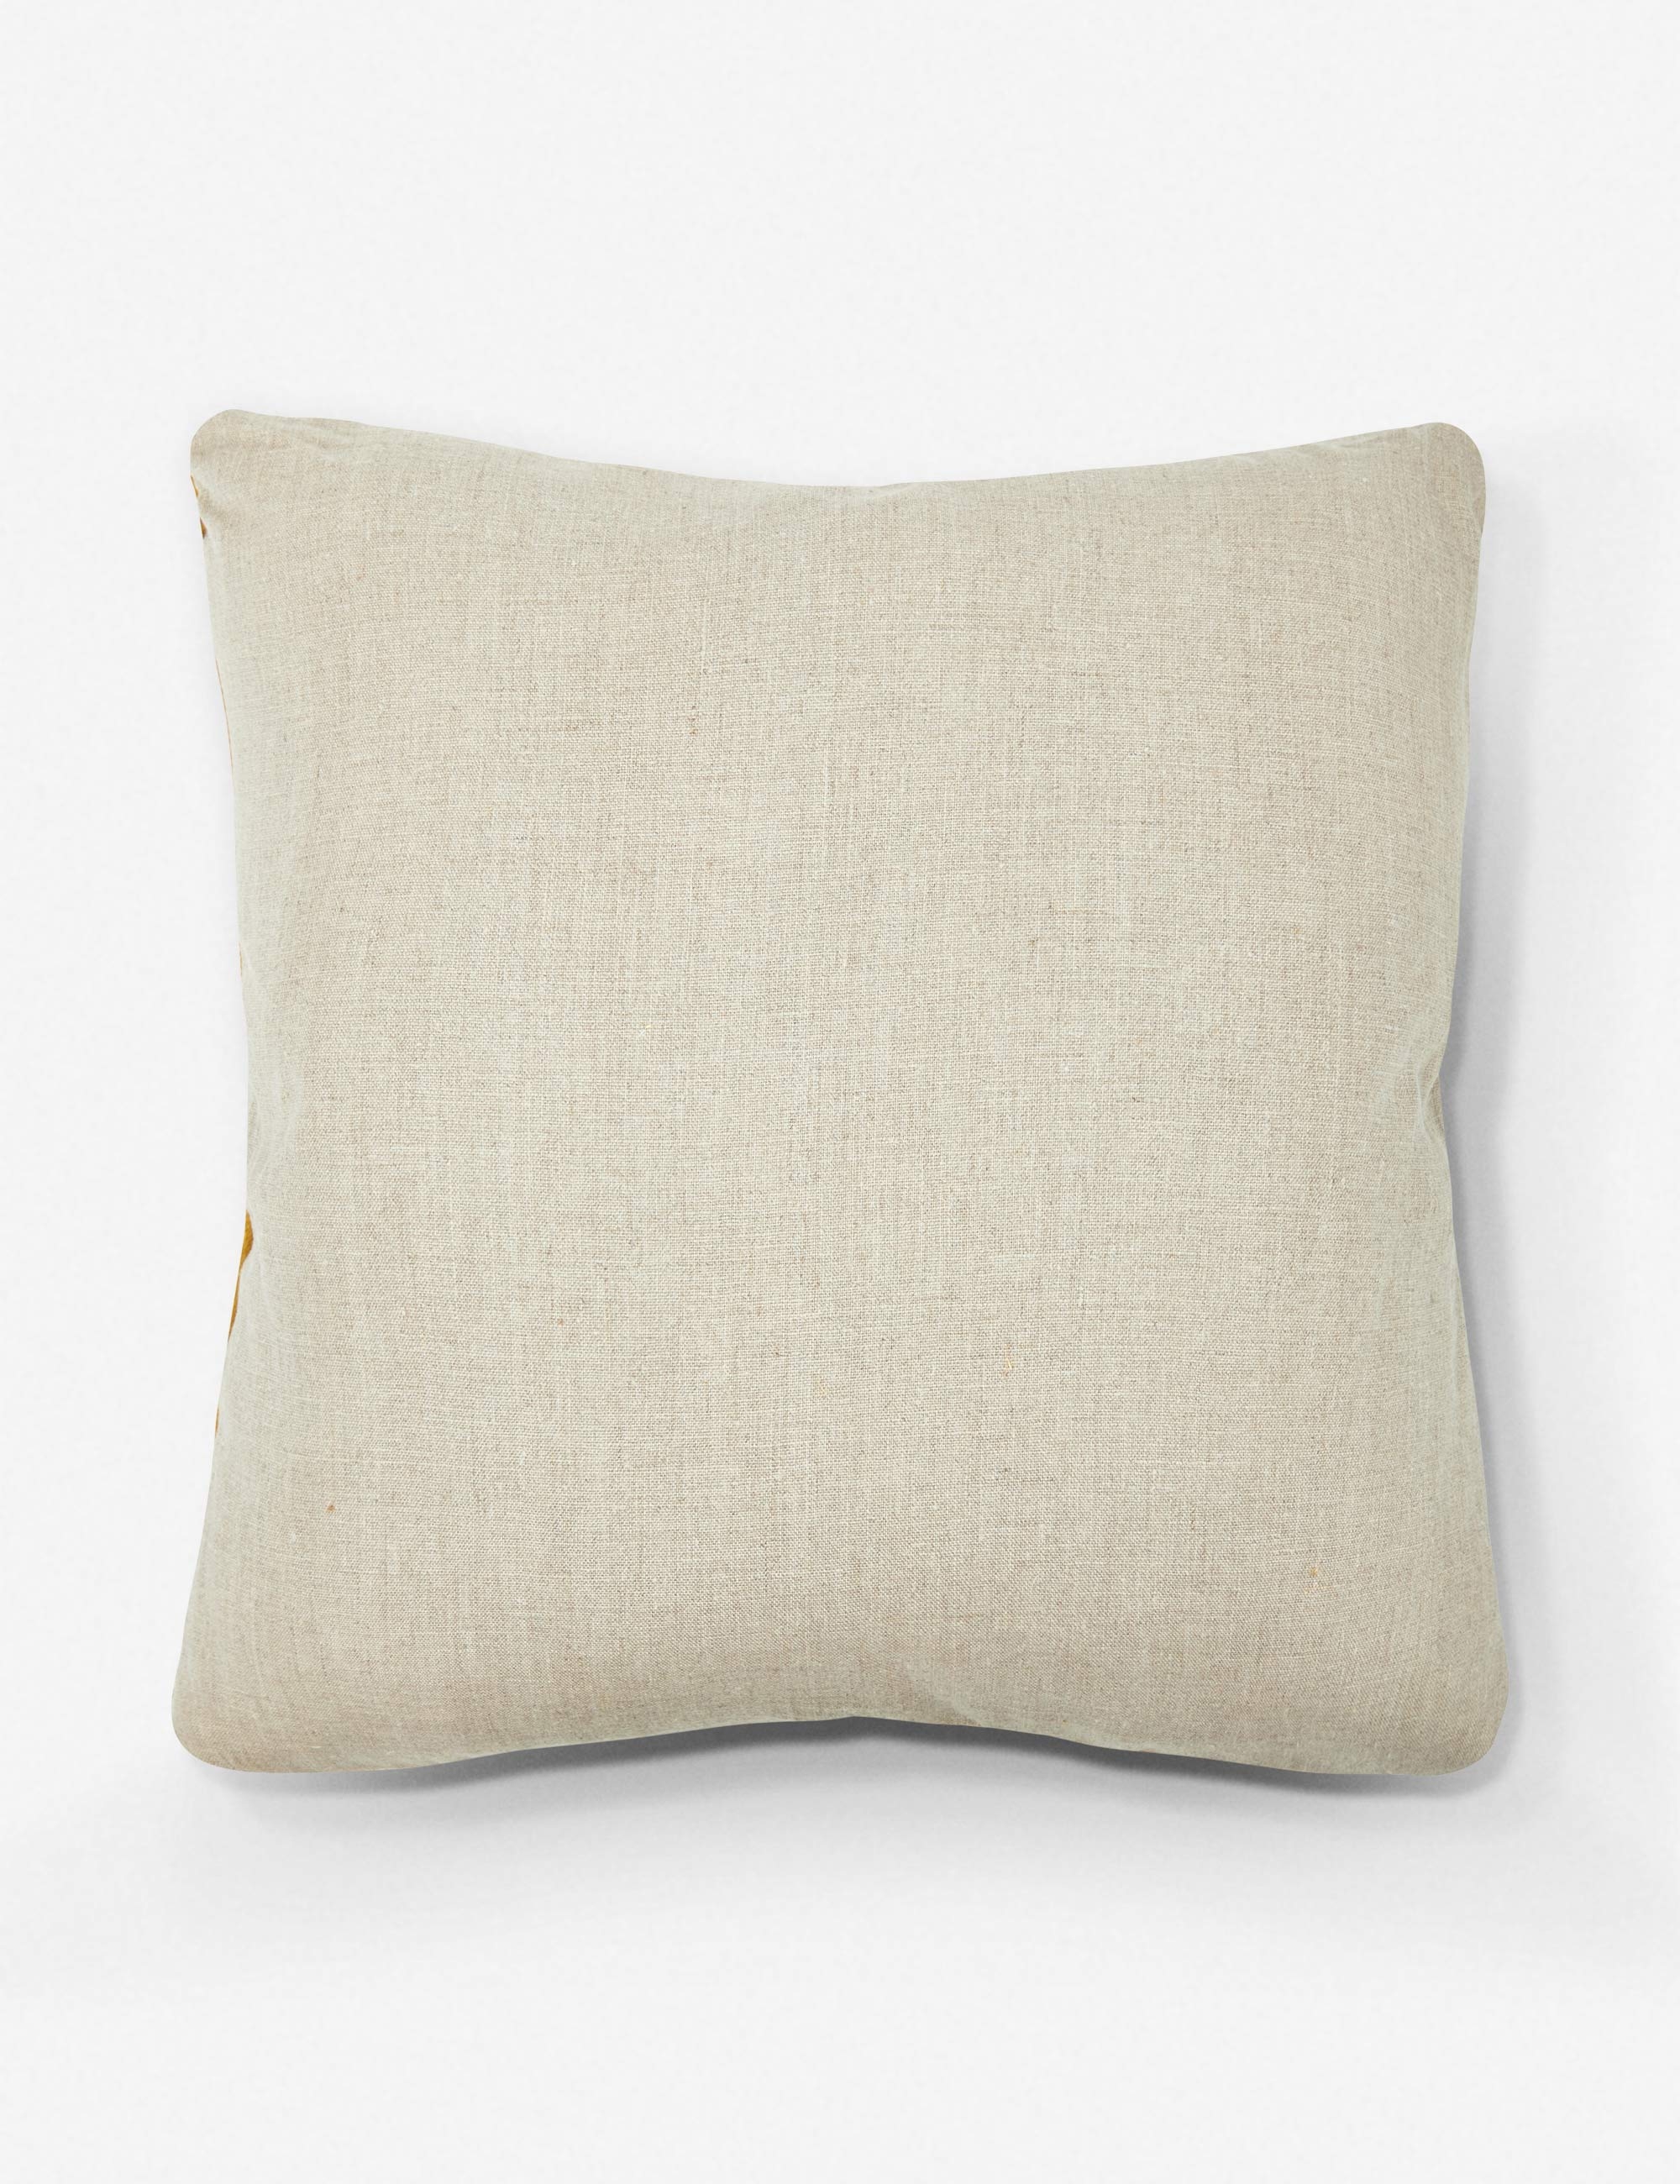 Imani One of a Kind Mudcloth Pillow - Image 4